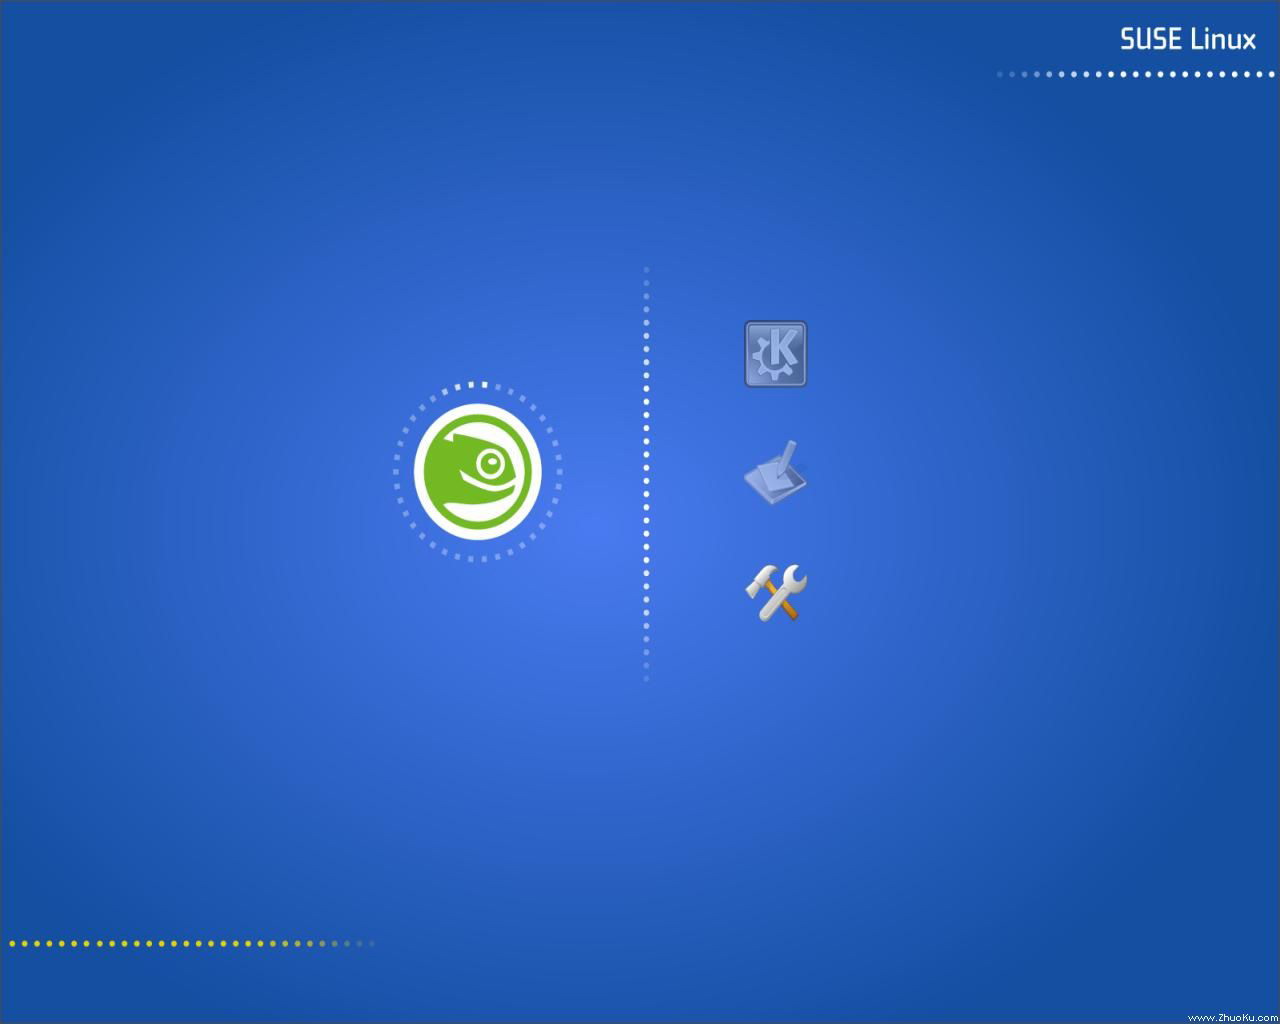 suse linux ֽ 1024*768 1280*1024 1600*1200(ֽ20)